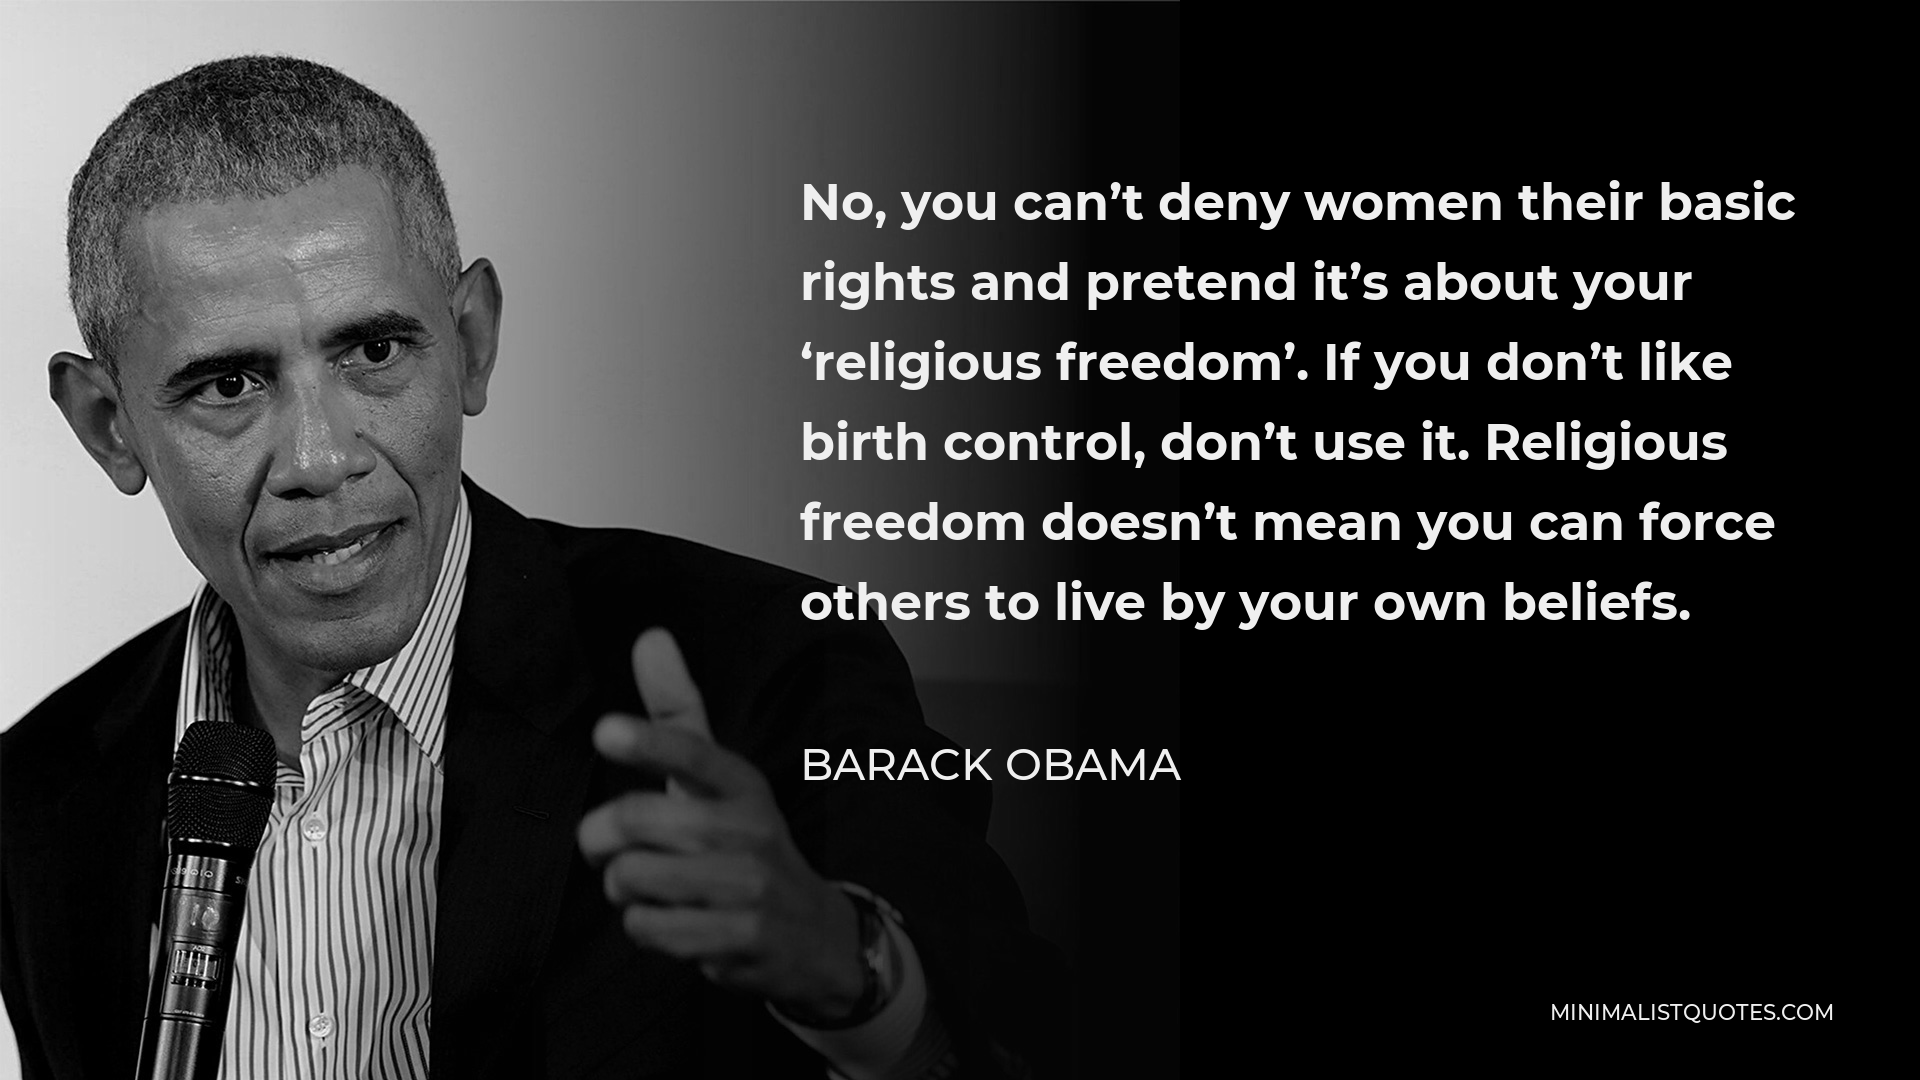 Barack Obama Quote - No, you can’t deny women their basic rights and pretend it’s about your ‘religious freedom’. If you don’t like birth control, don’t use it. Religious freedom doesn’t mean you can force others to live by your own beliefs.